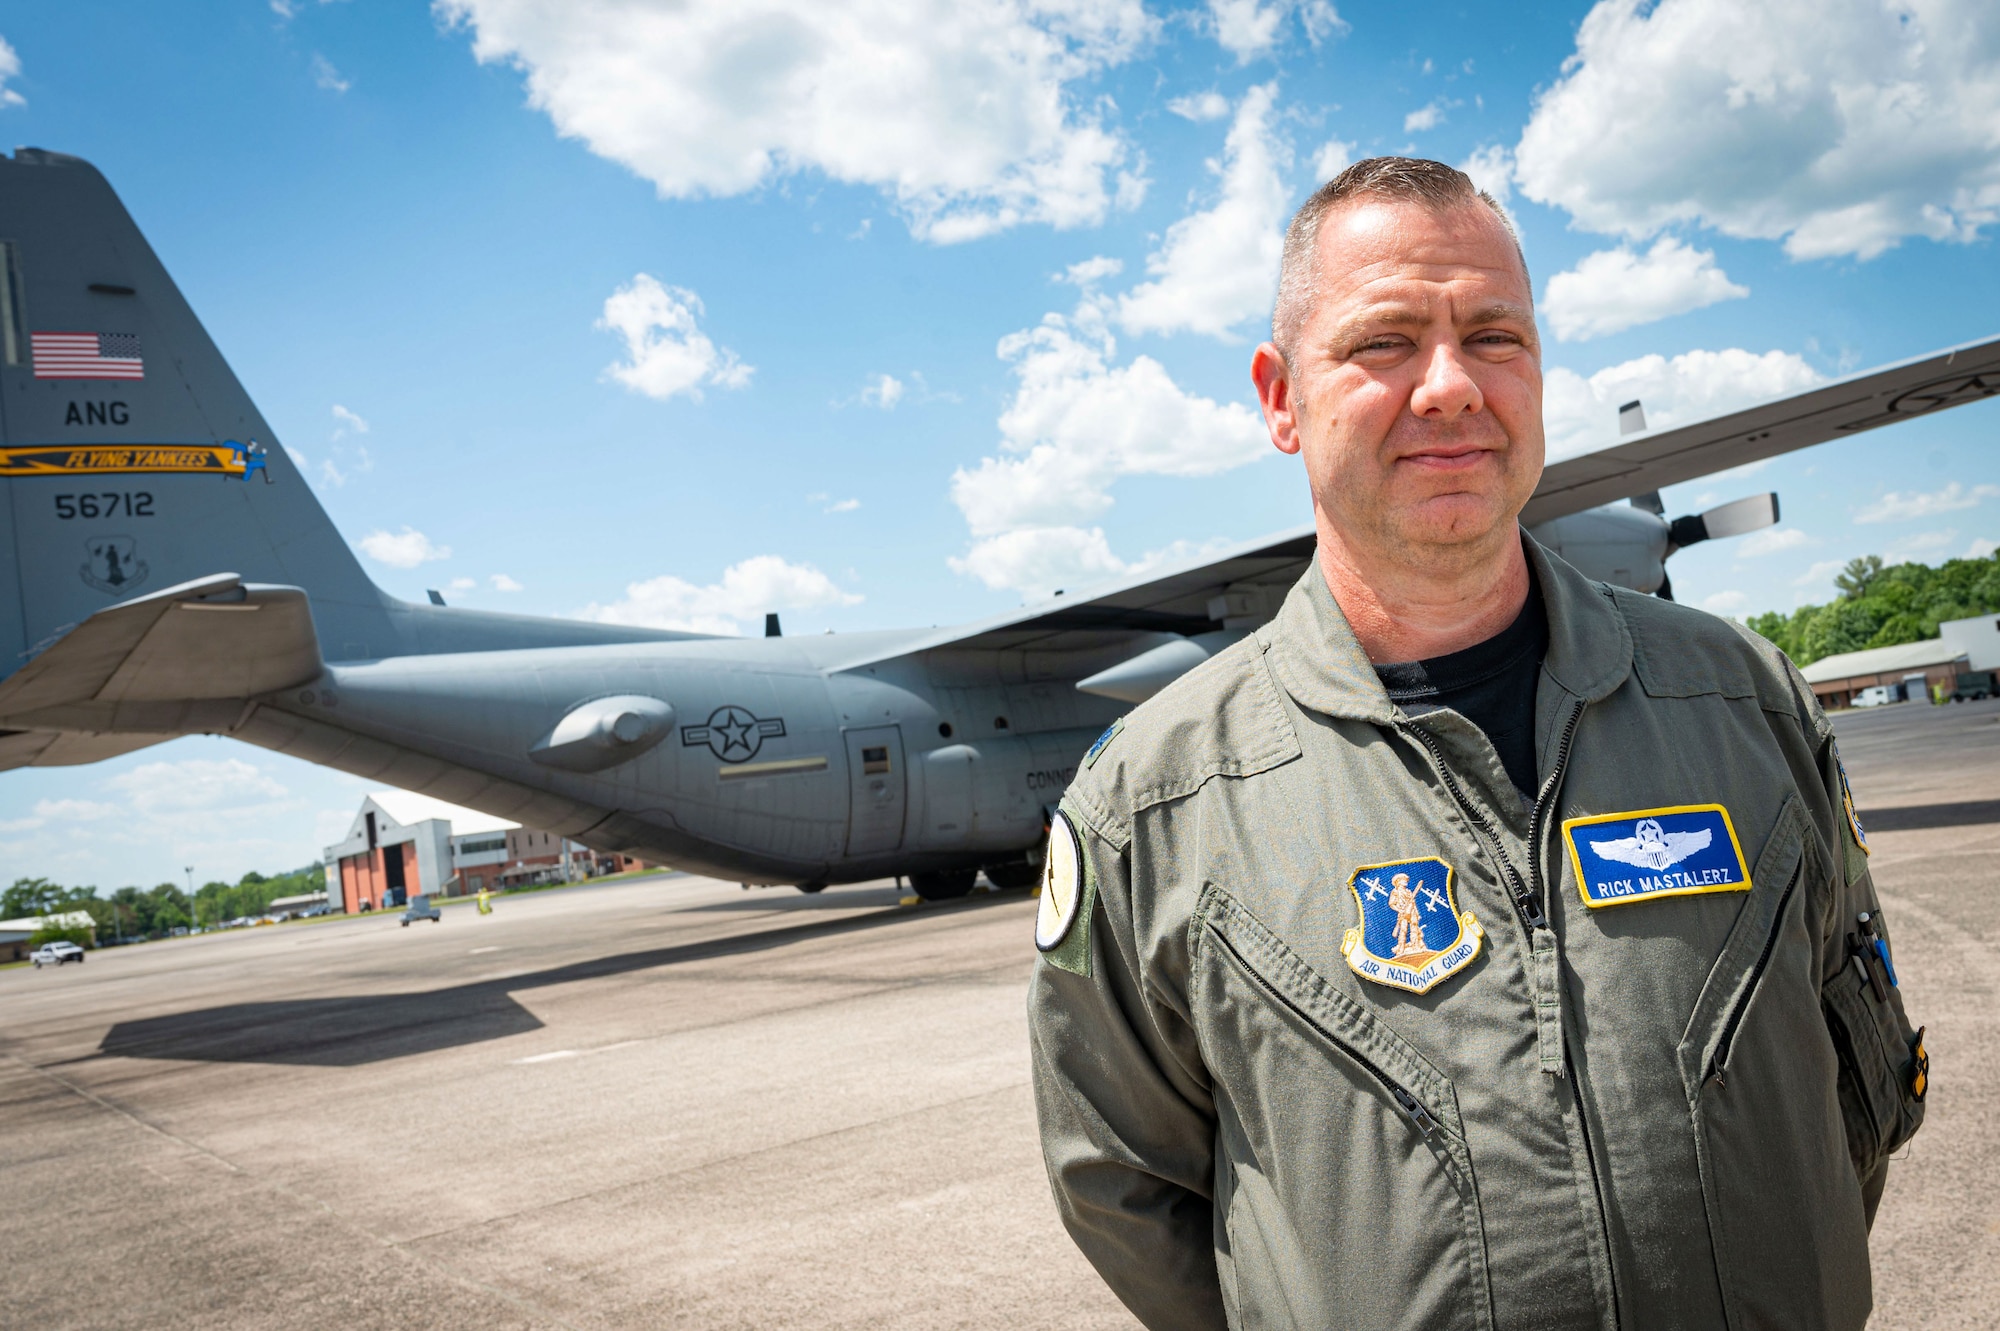 Air Force Lt. Col. Richard Paul Mastalerz II, a pilot assigned to the 103rd Airlift Wing, Connecticut Air National Guard, prepares to fly a C-130H aircraft, June 4, 2022 at Bradley Air National Guard Base, East Granby, Conn. The flight was Mastalerz’ first since being diagnosed with stage 3 colorectal cancer in 2020. (U.S. Air Force photo by Master Sgt. Tamara R. Dabney)